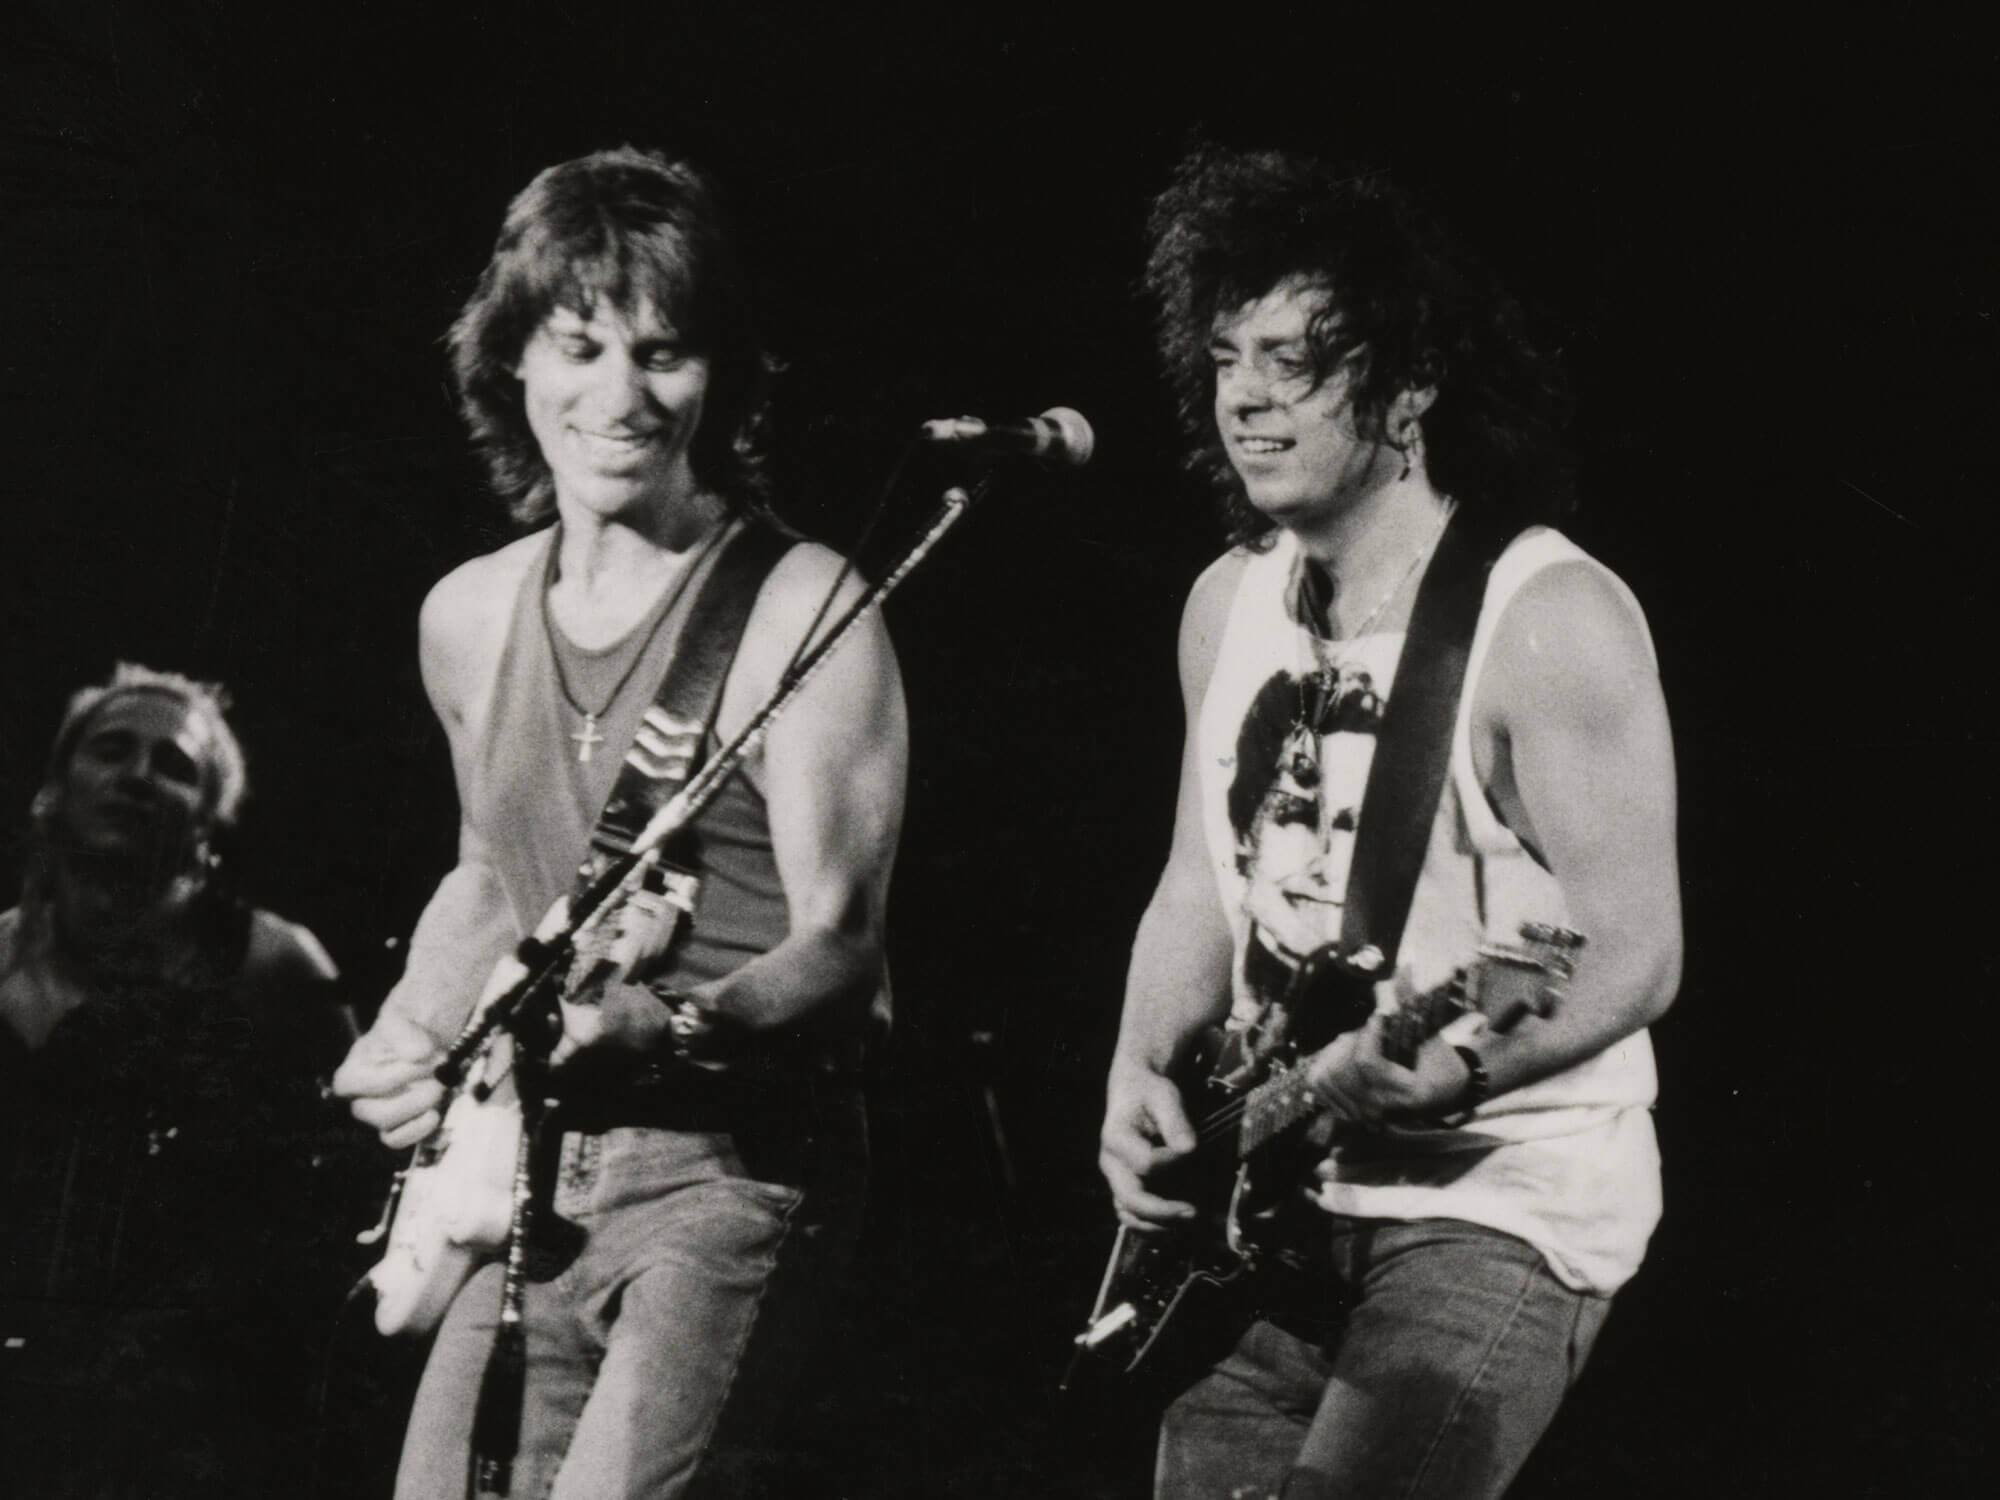 [L-R] Jeff Beck and Steve Lukather playing guitar onstage together